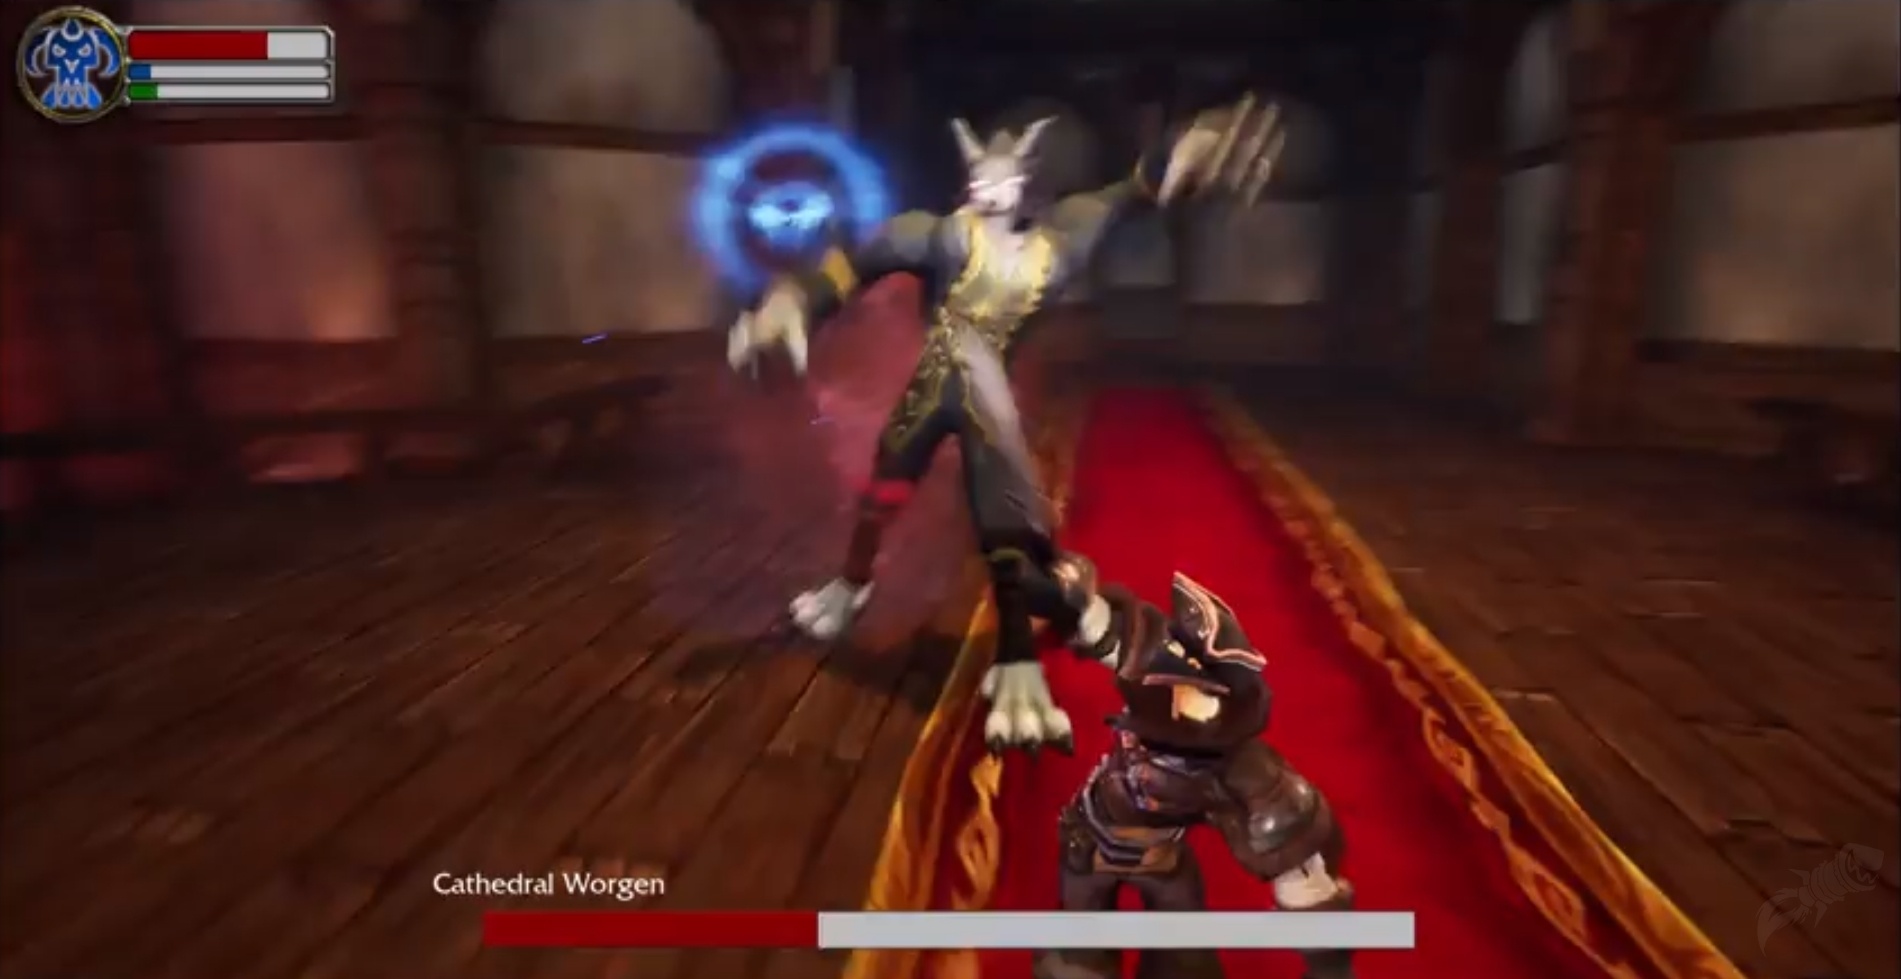 World of Warcraft Action RPG in Unreal Engine 4 - Wowhead News